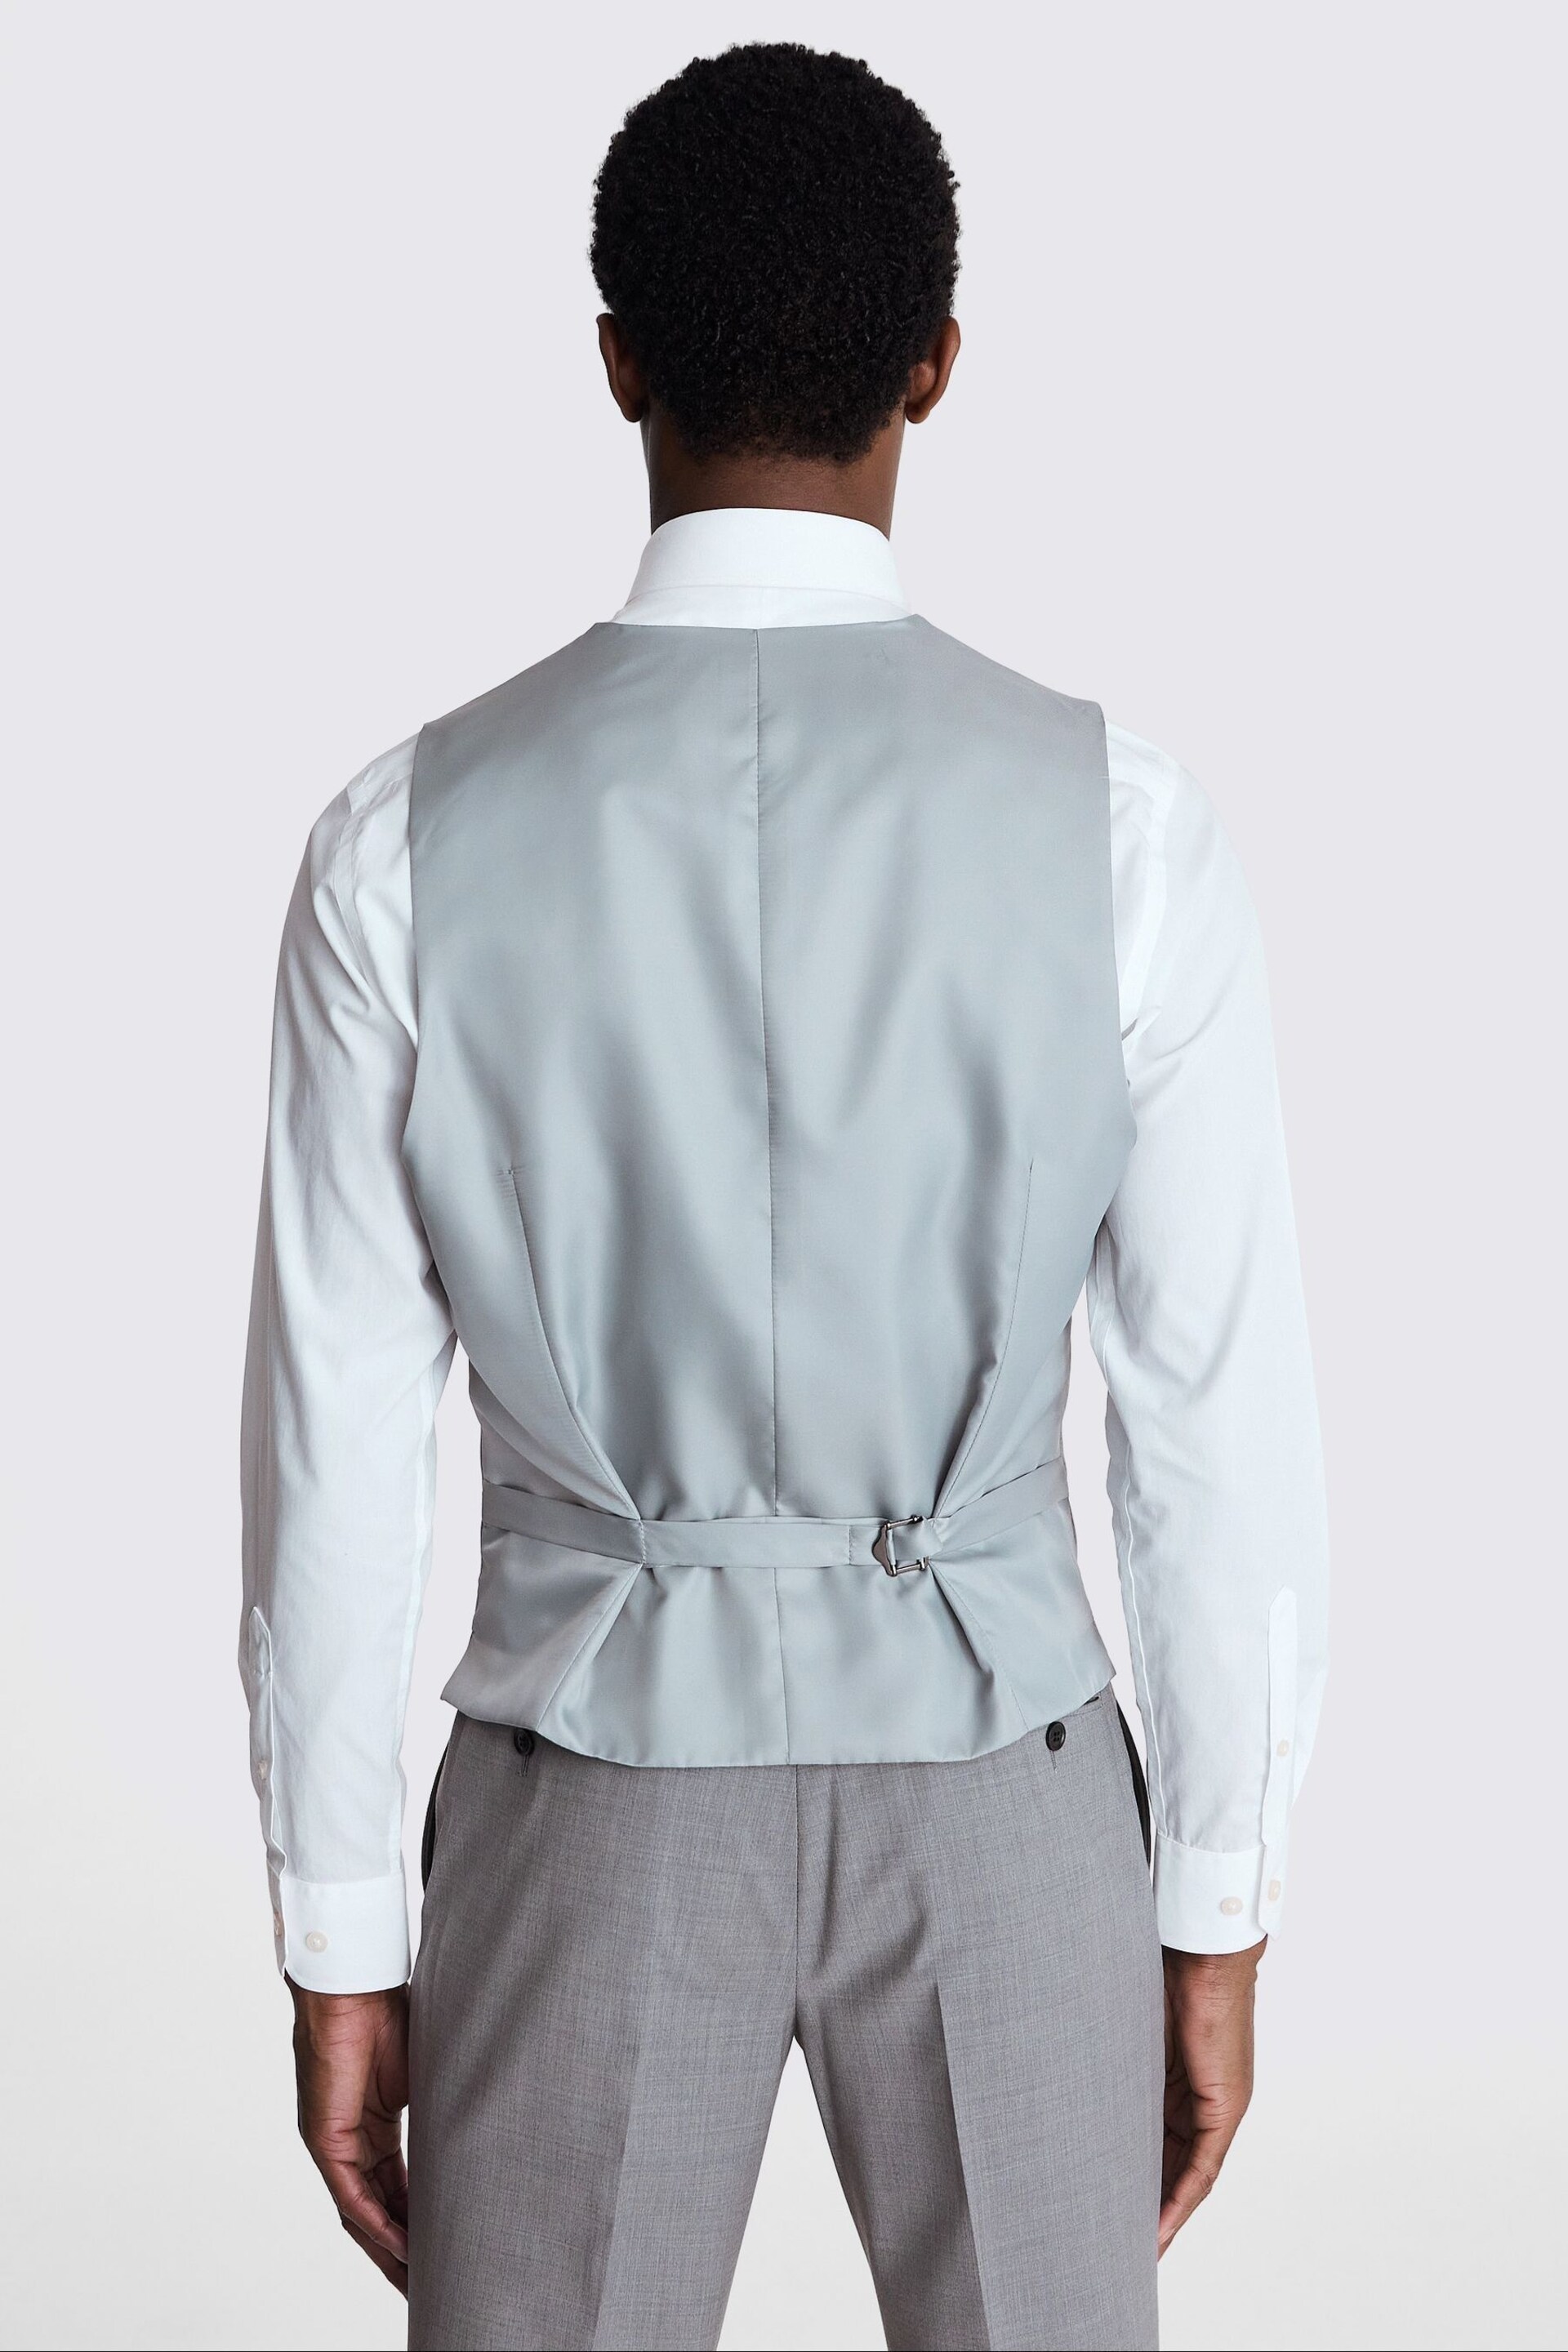 MOSS Light Grey Tailored Fit Performance Suit Waistcoat - Image 2 of 3